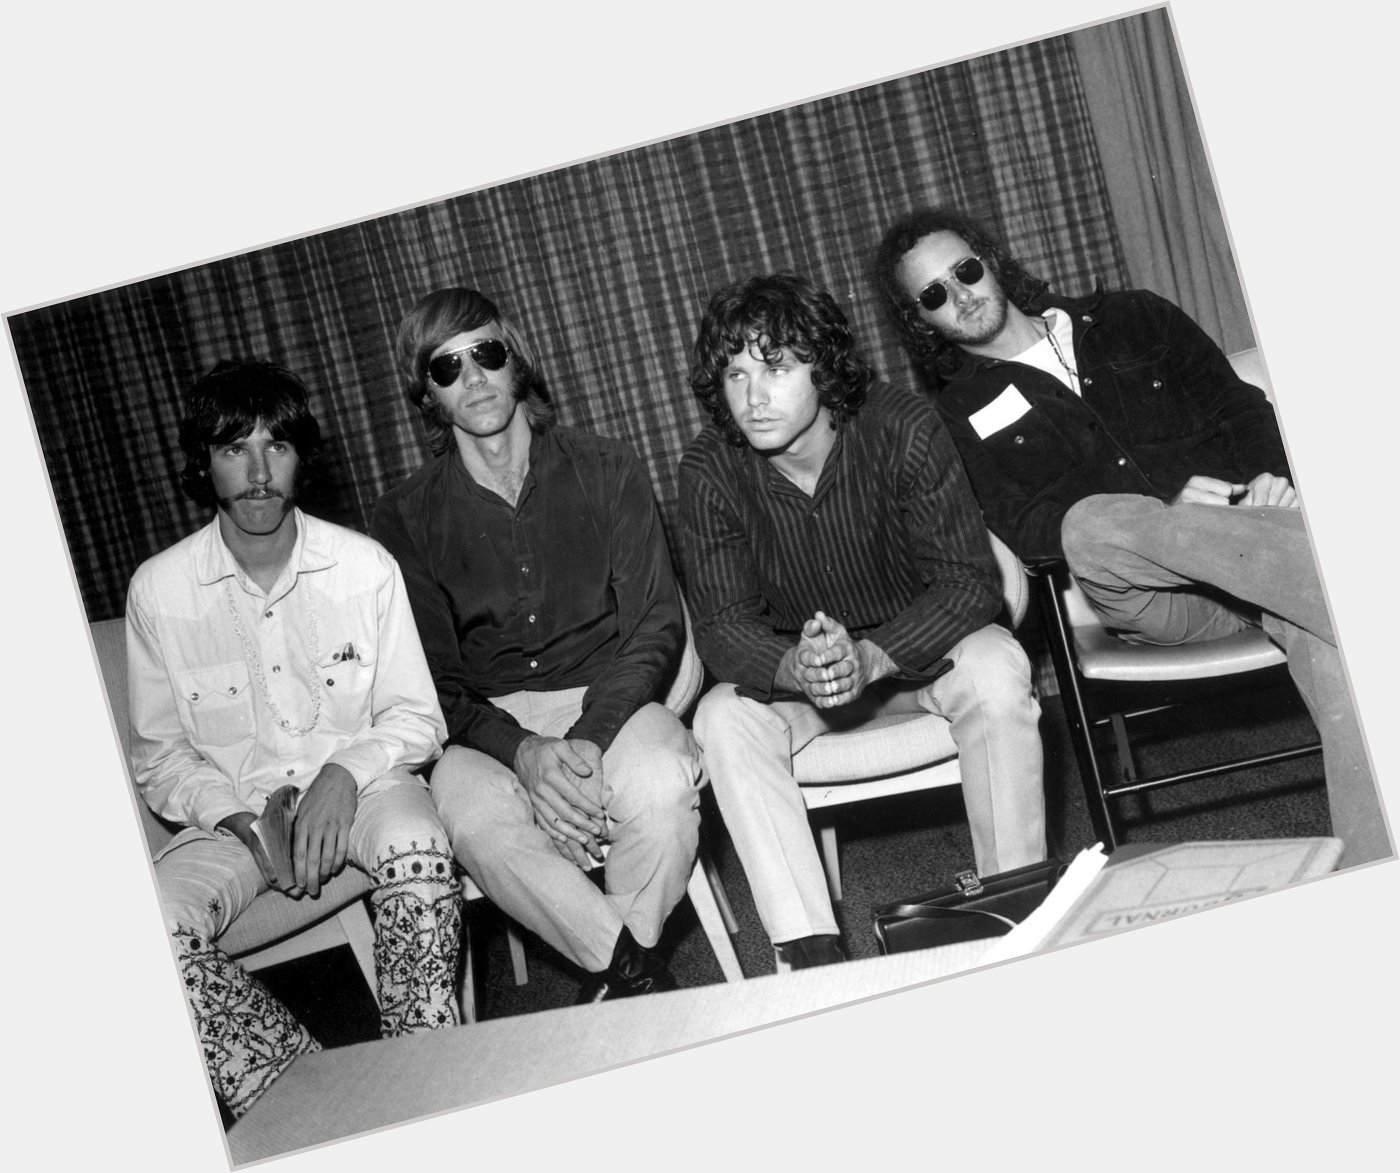 Happy Birthday John Densmore (Born December,1,1944) of the Doors
Photo by Central Press/Getty Images 